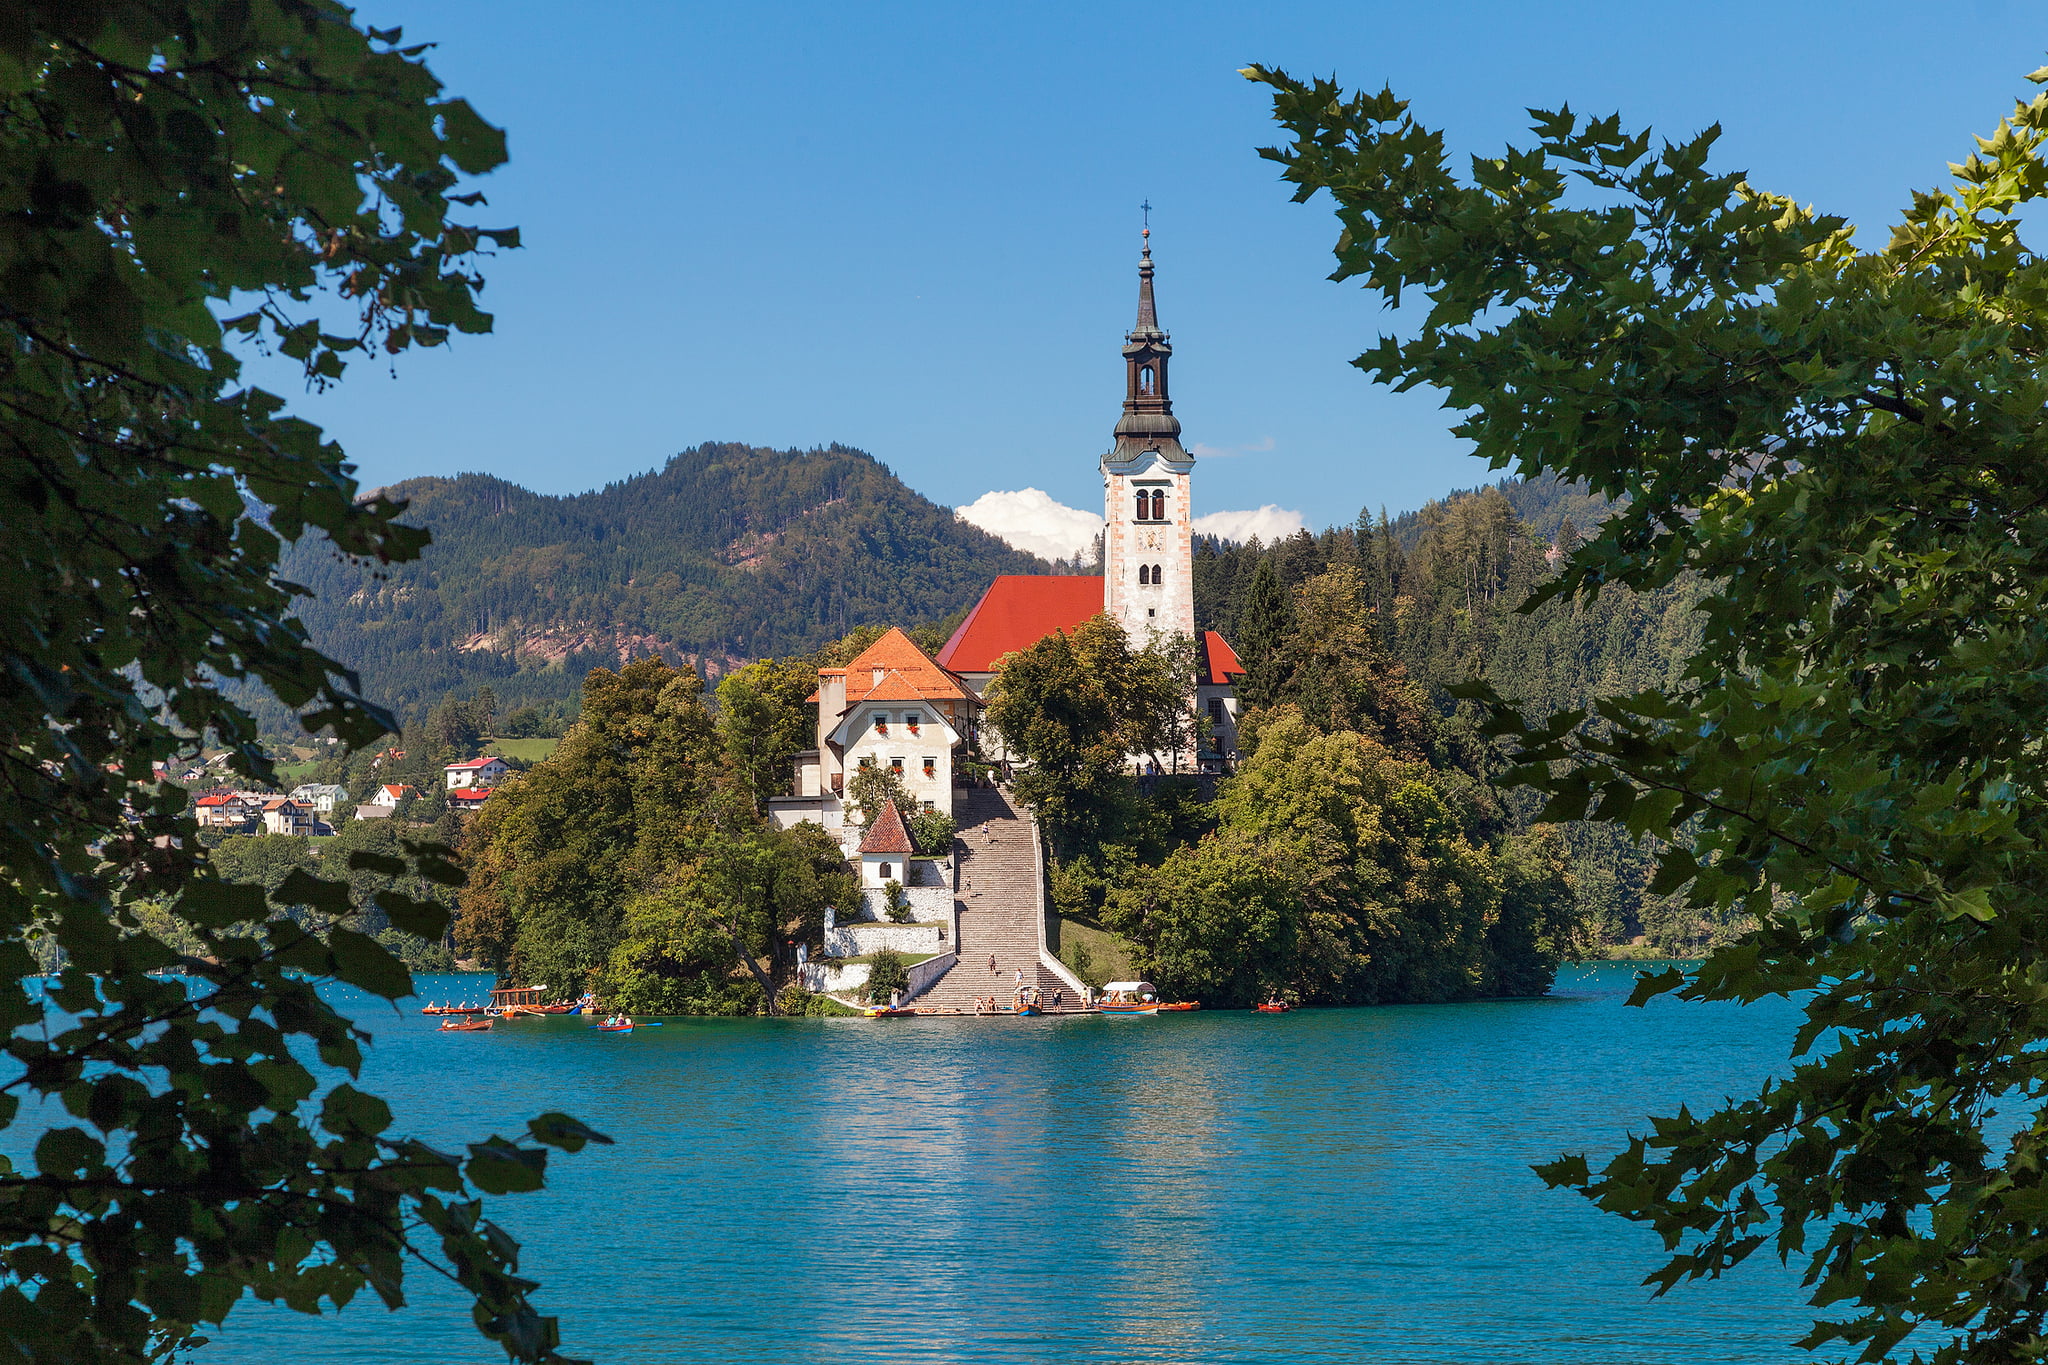 white and red house, island, Slovenia, Lake Bled, Assumption of Mary Pilgrimage Church